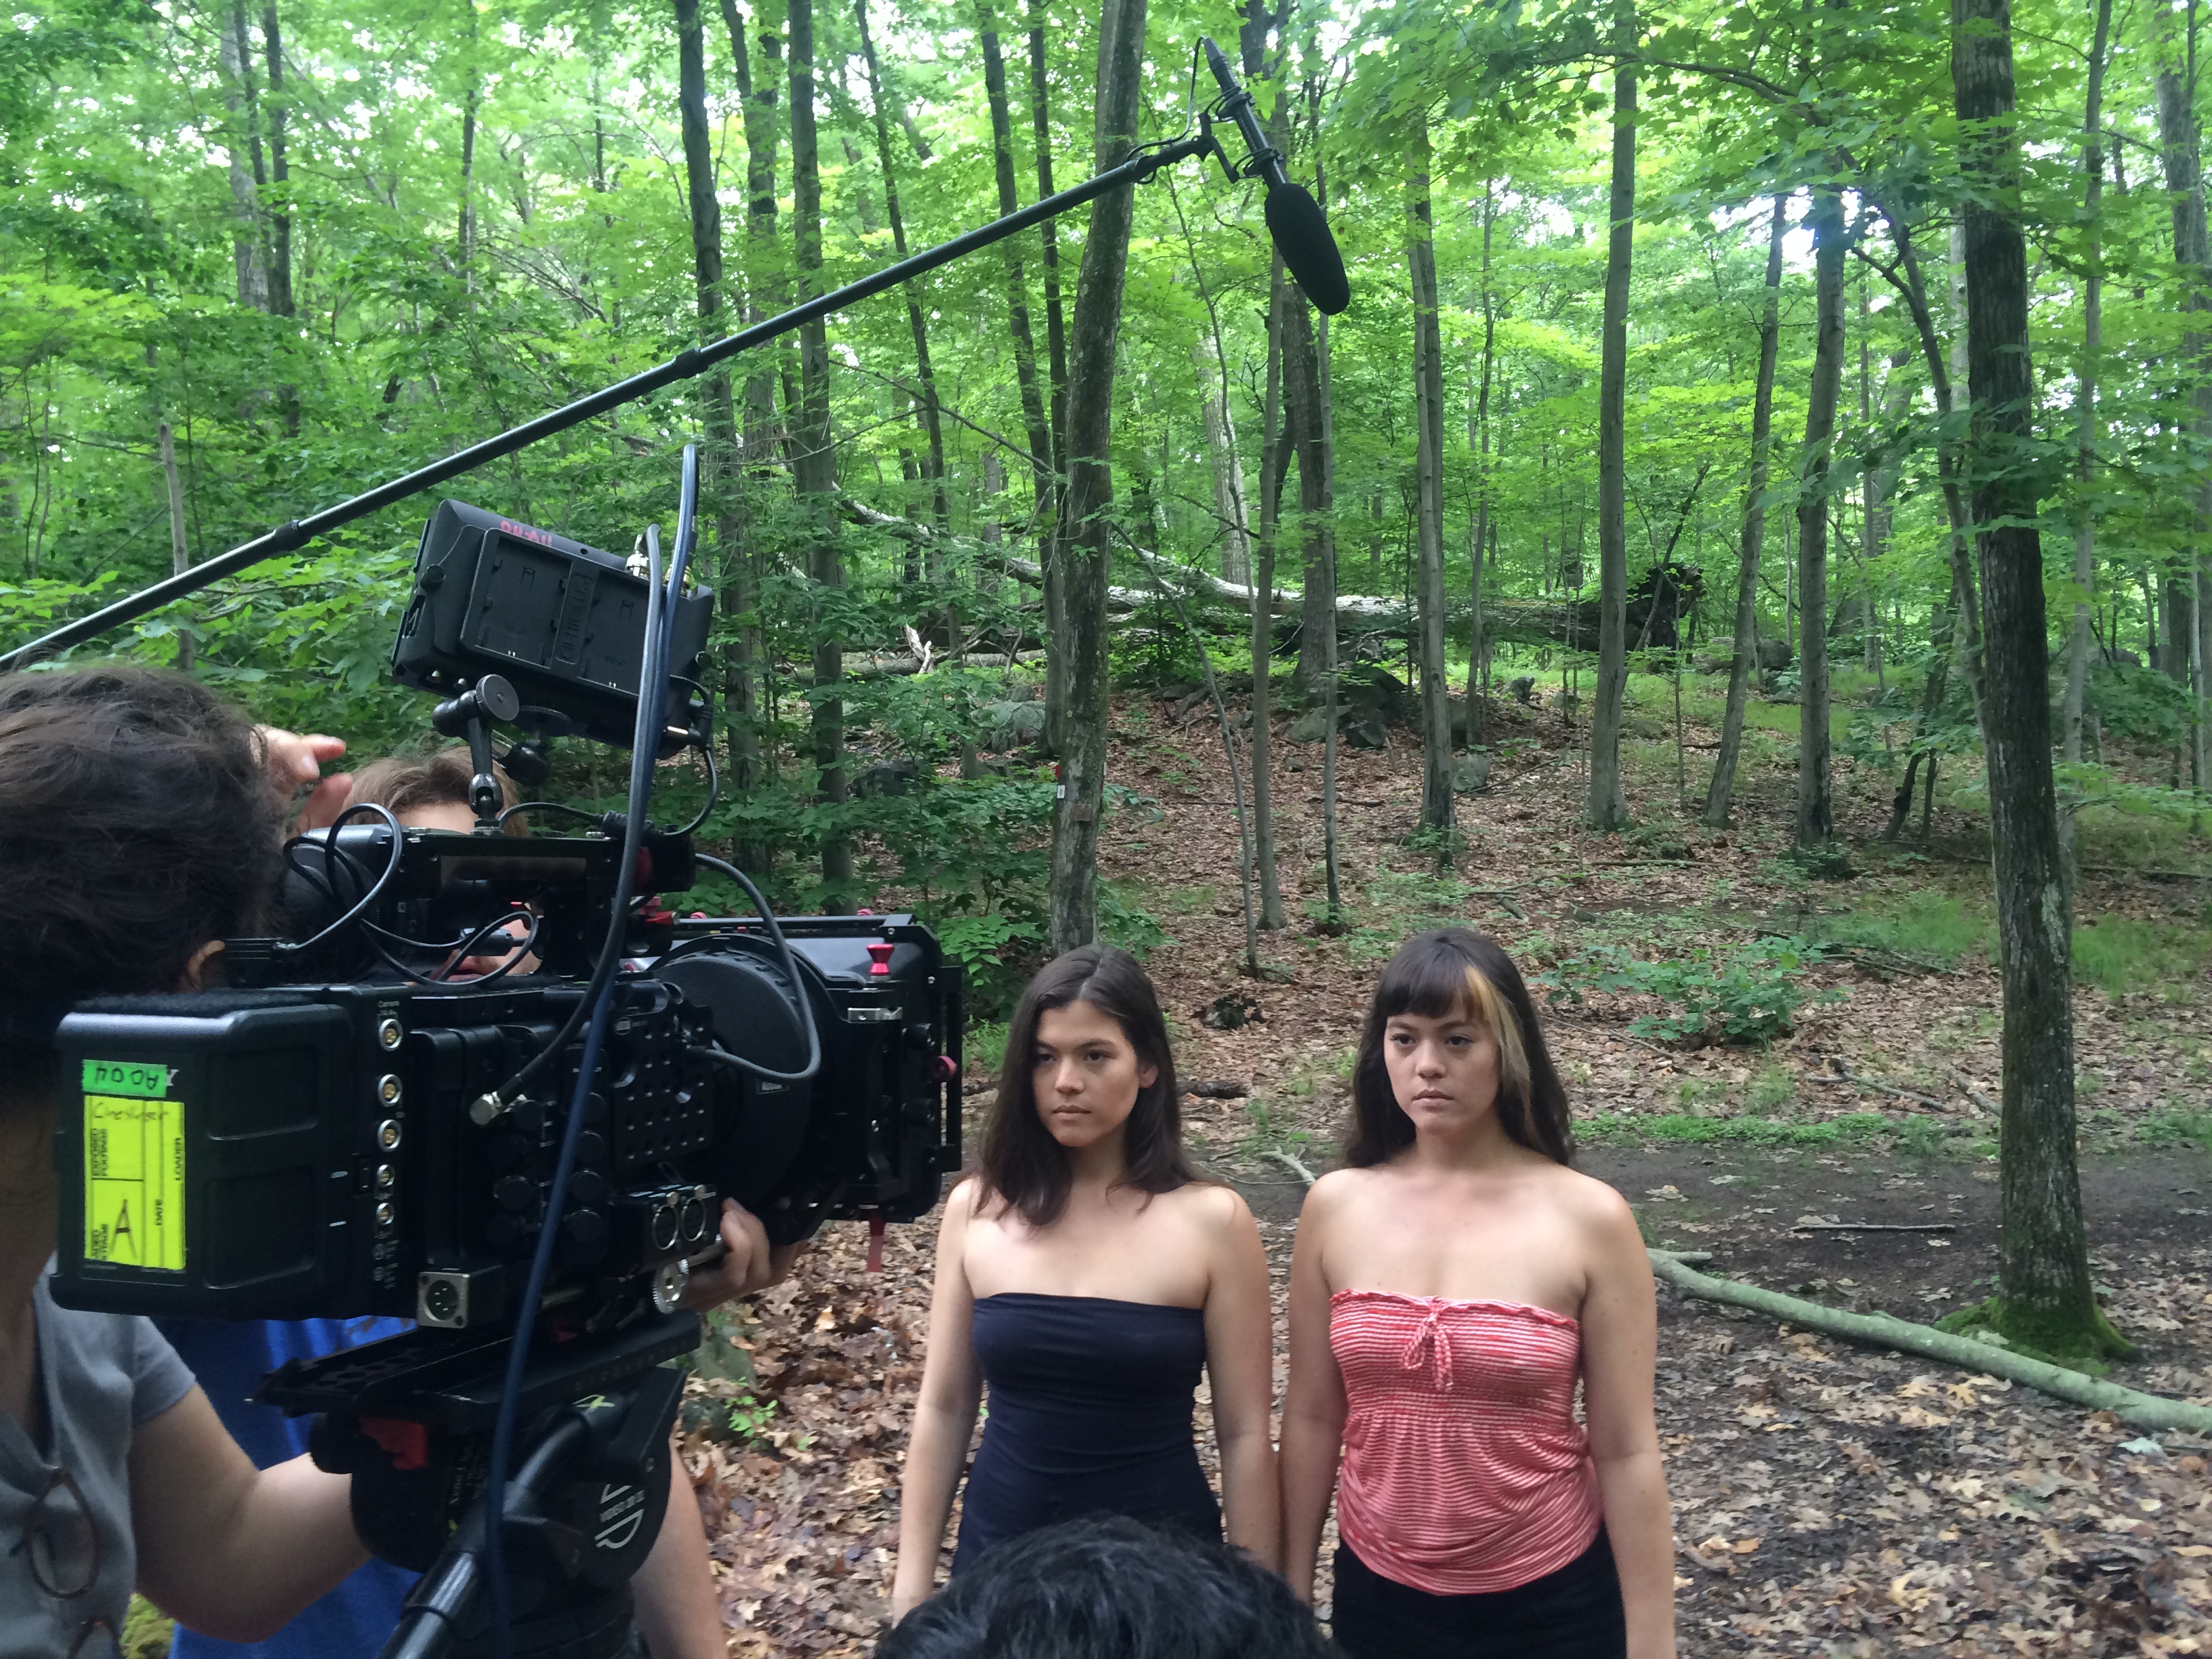 With twin Leah Kreitz, shooting the film Counterpoint